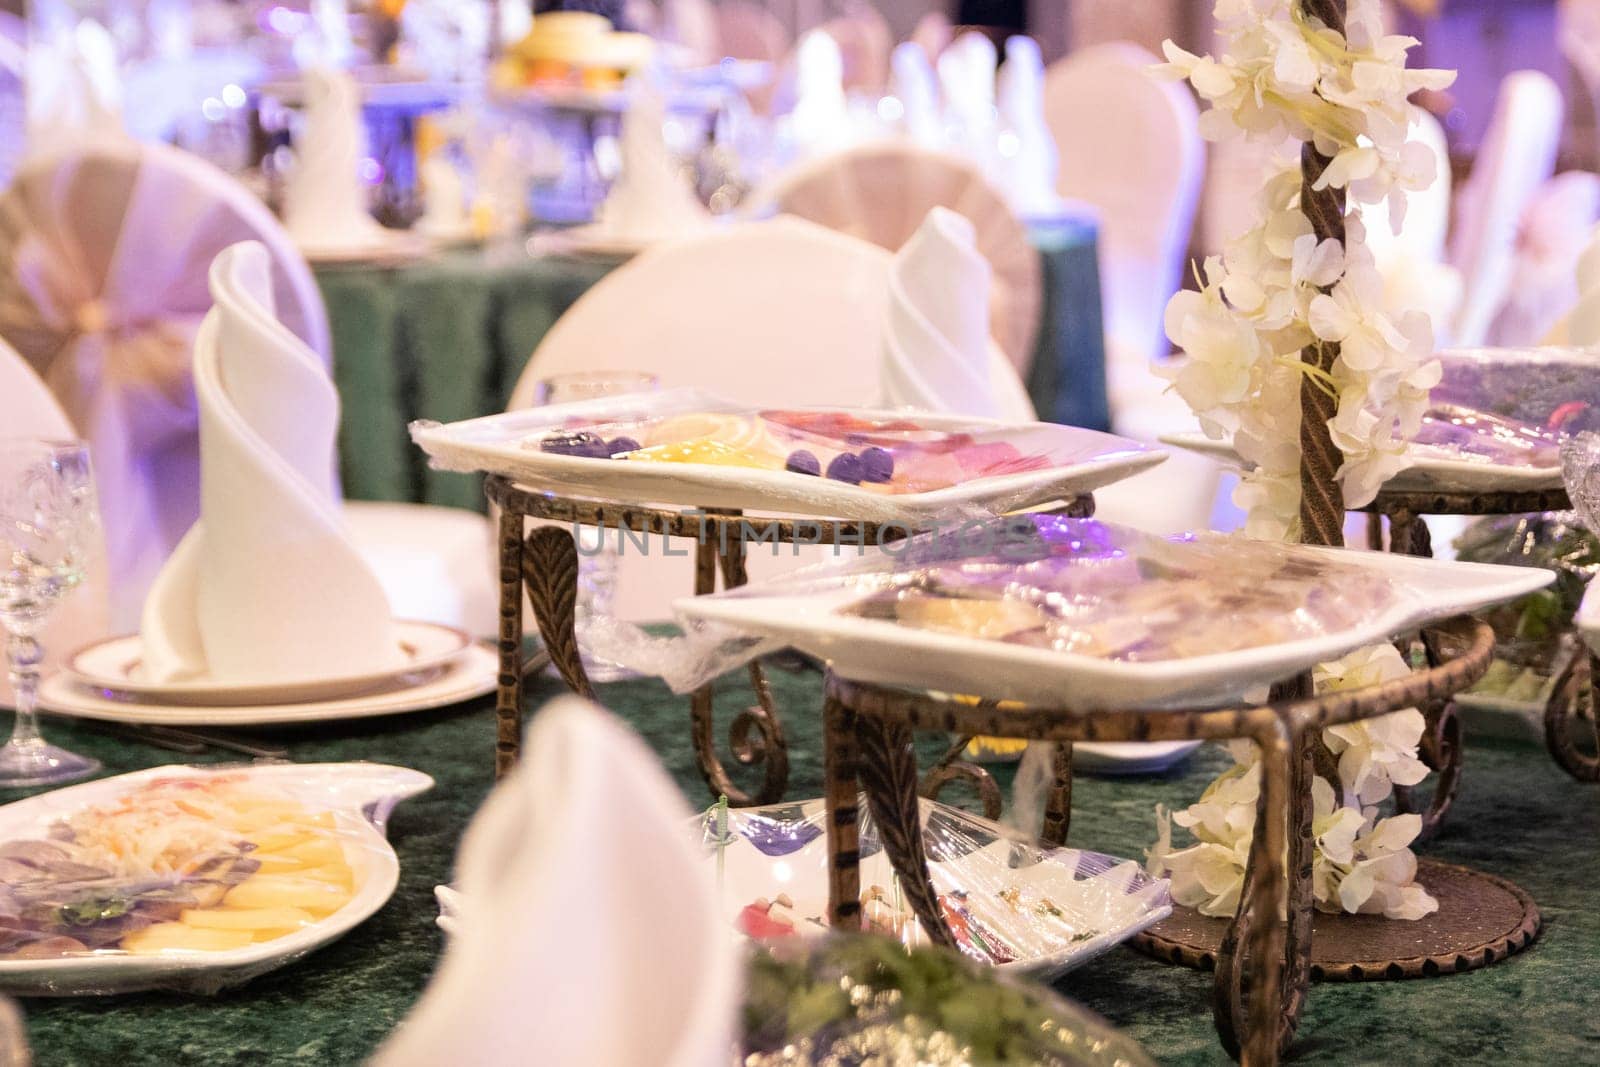 Serving a festive table on a green tablecloth before the arrival of guests in the banquet hall.